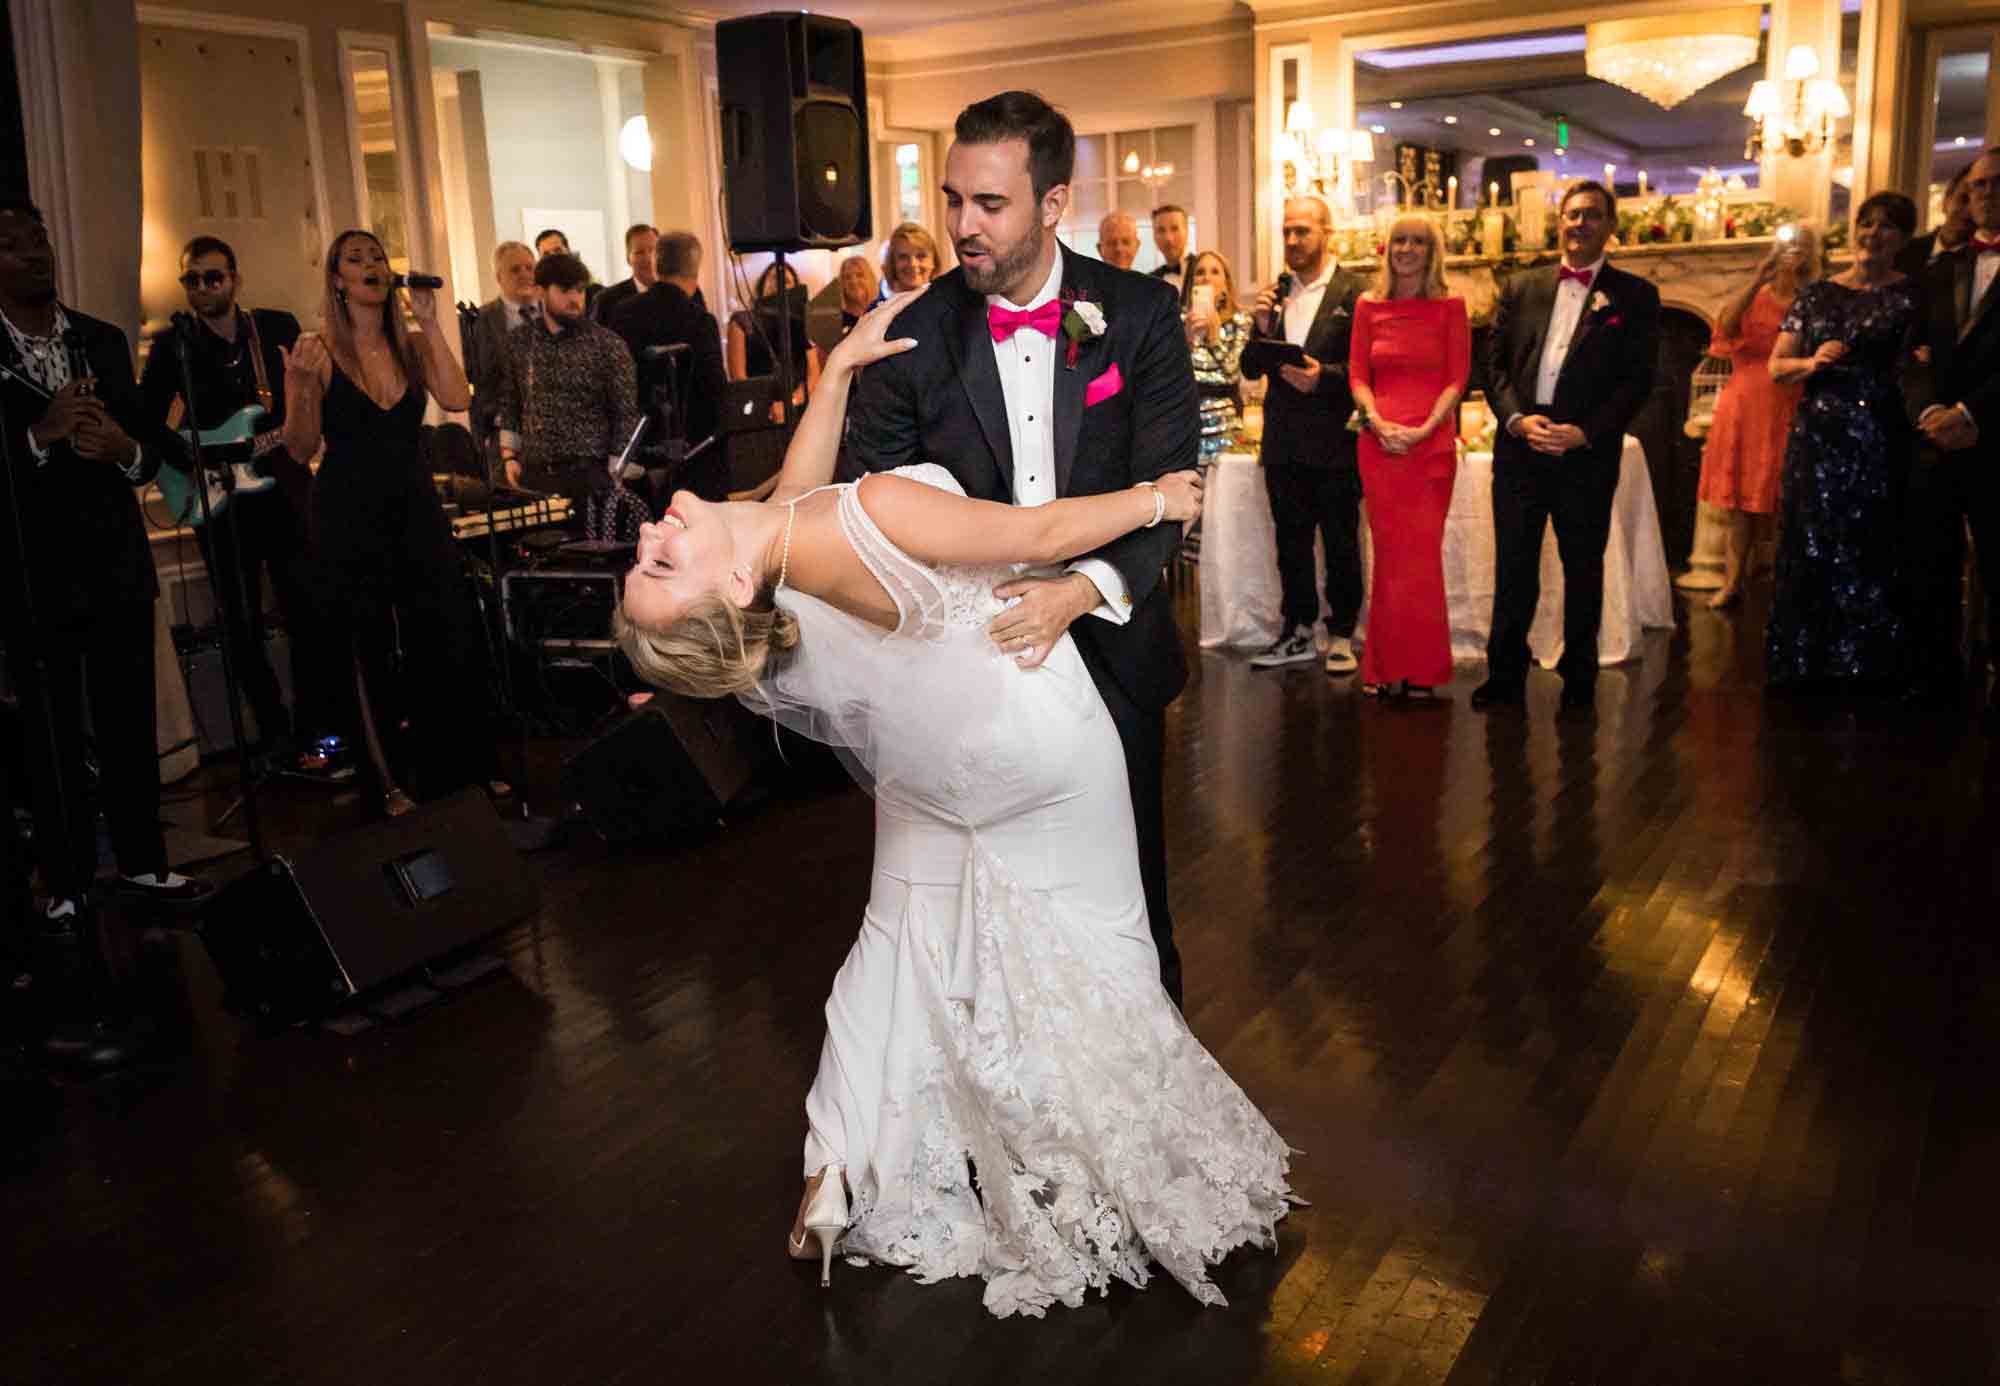 Groom leading bride into a dip on dance floor at a Briarcliff Manor wedding